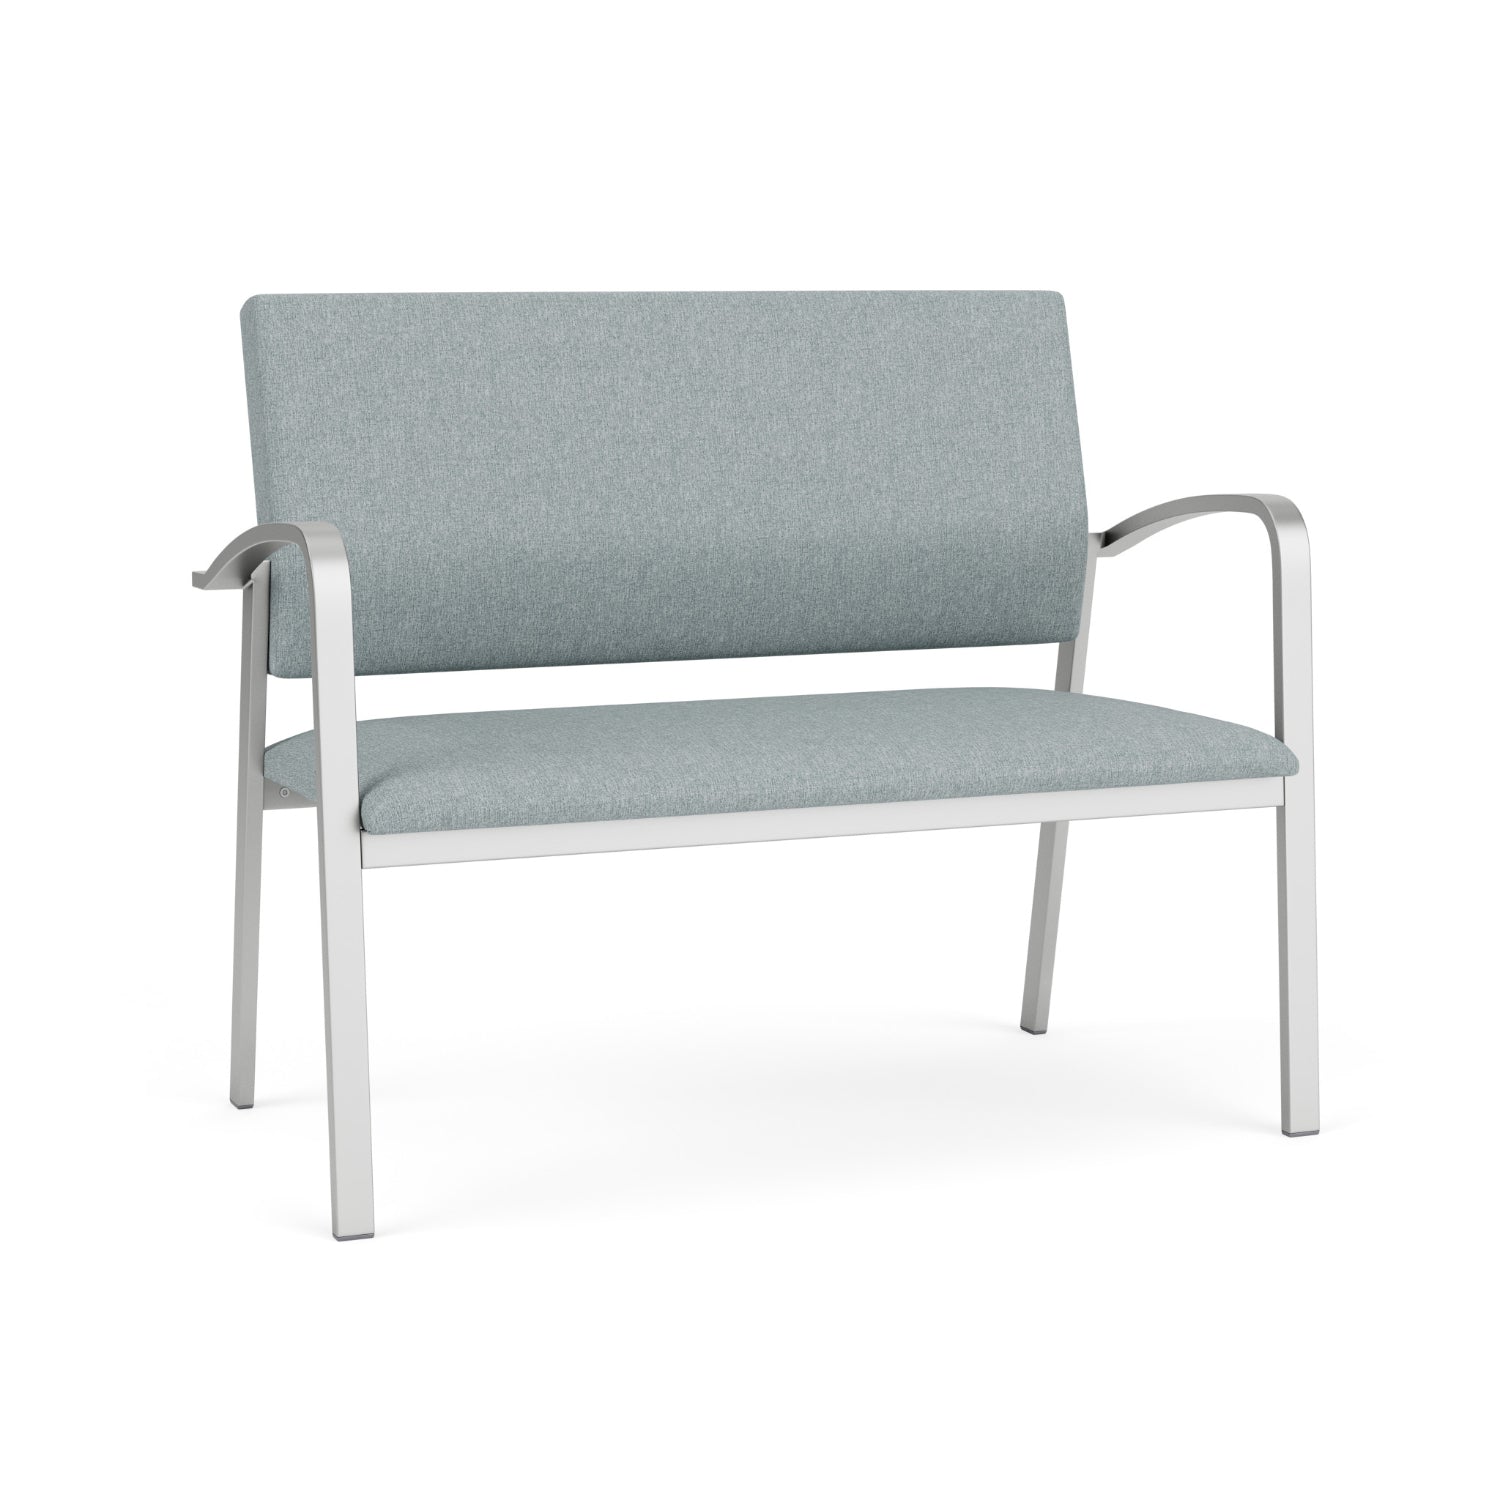 Newport Collection Reception Seating, Loveseat, Healthcare Vinyl Upholstery, FREE SHIPPING